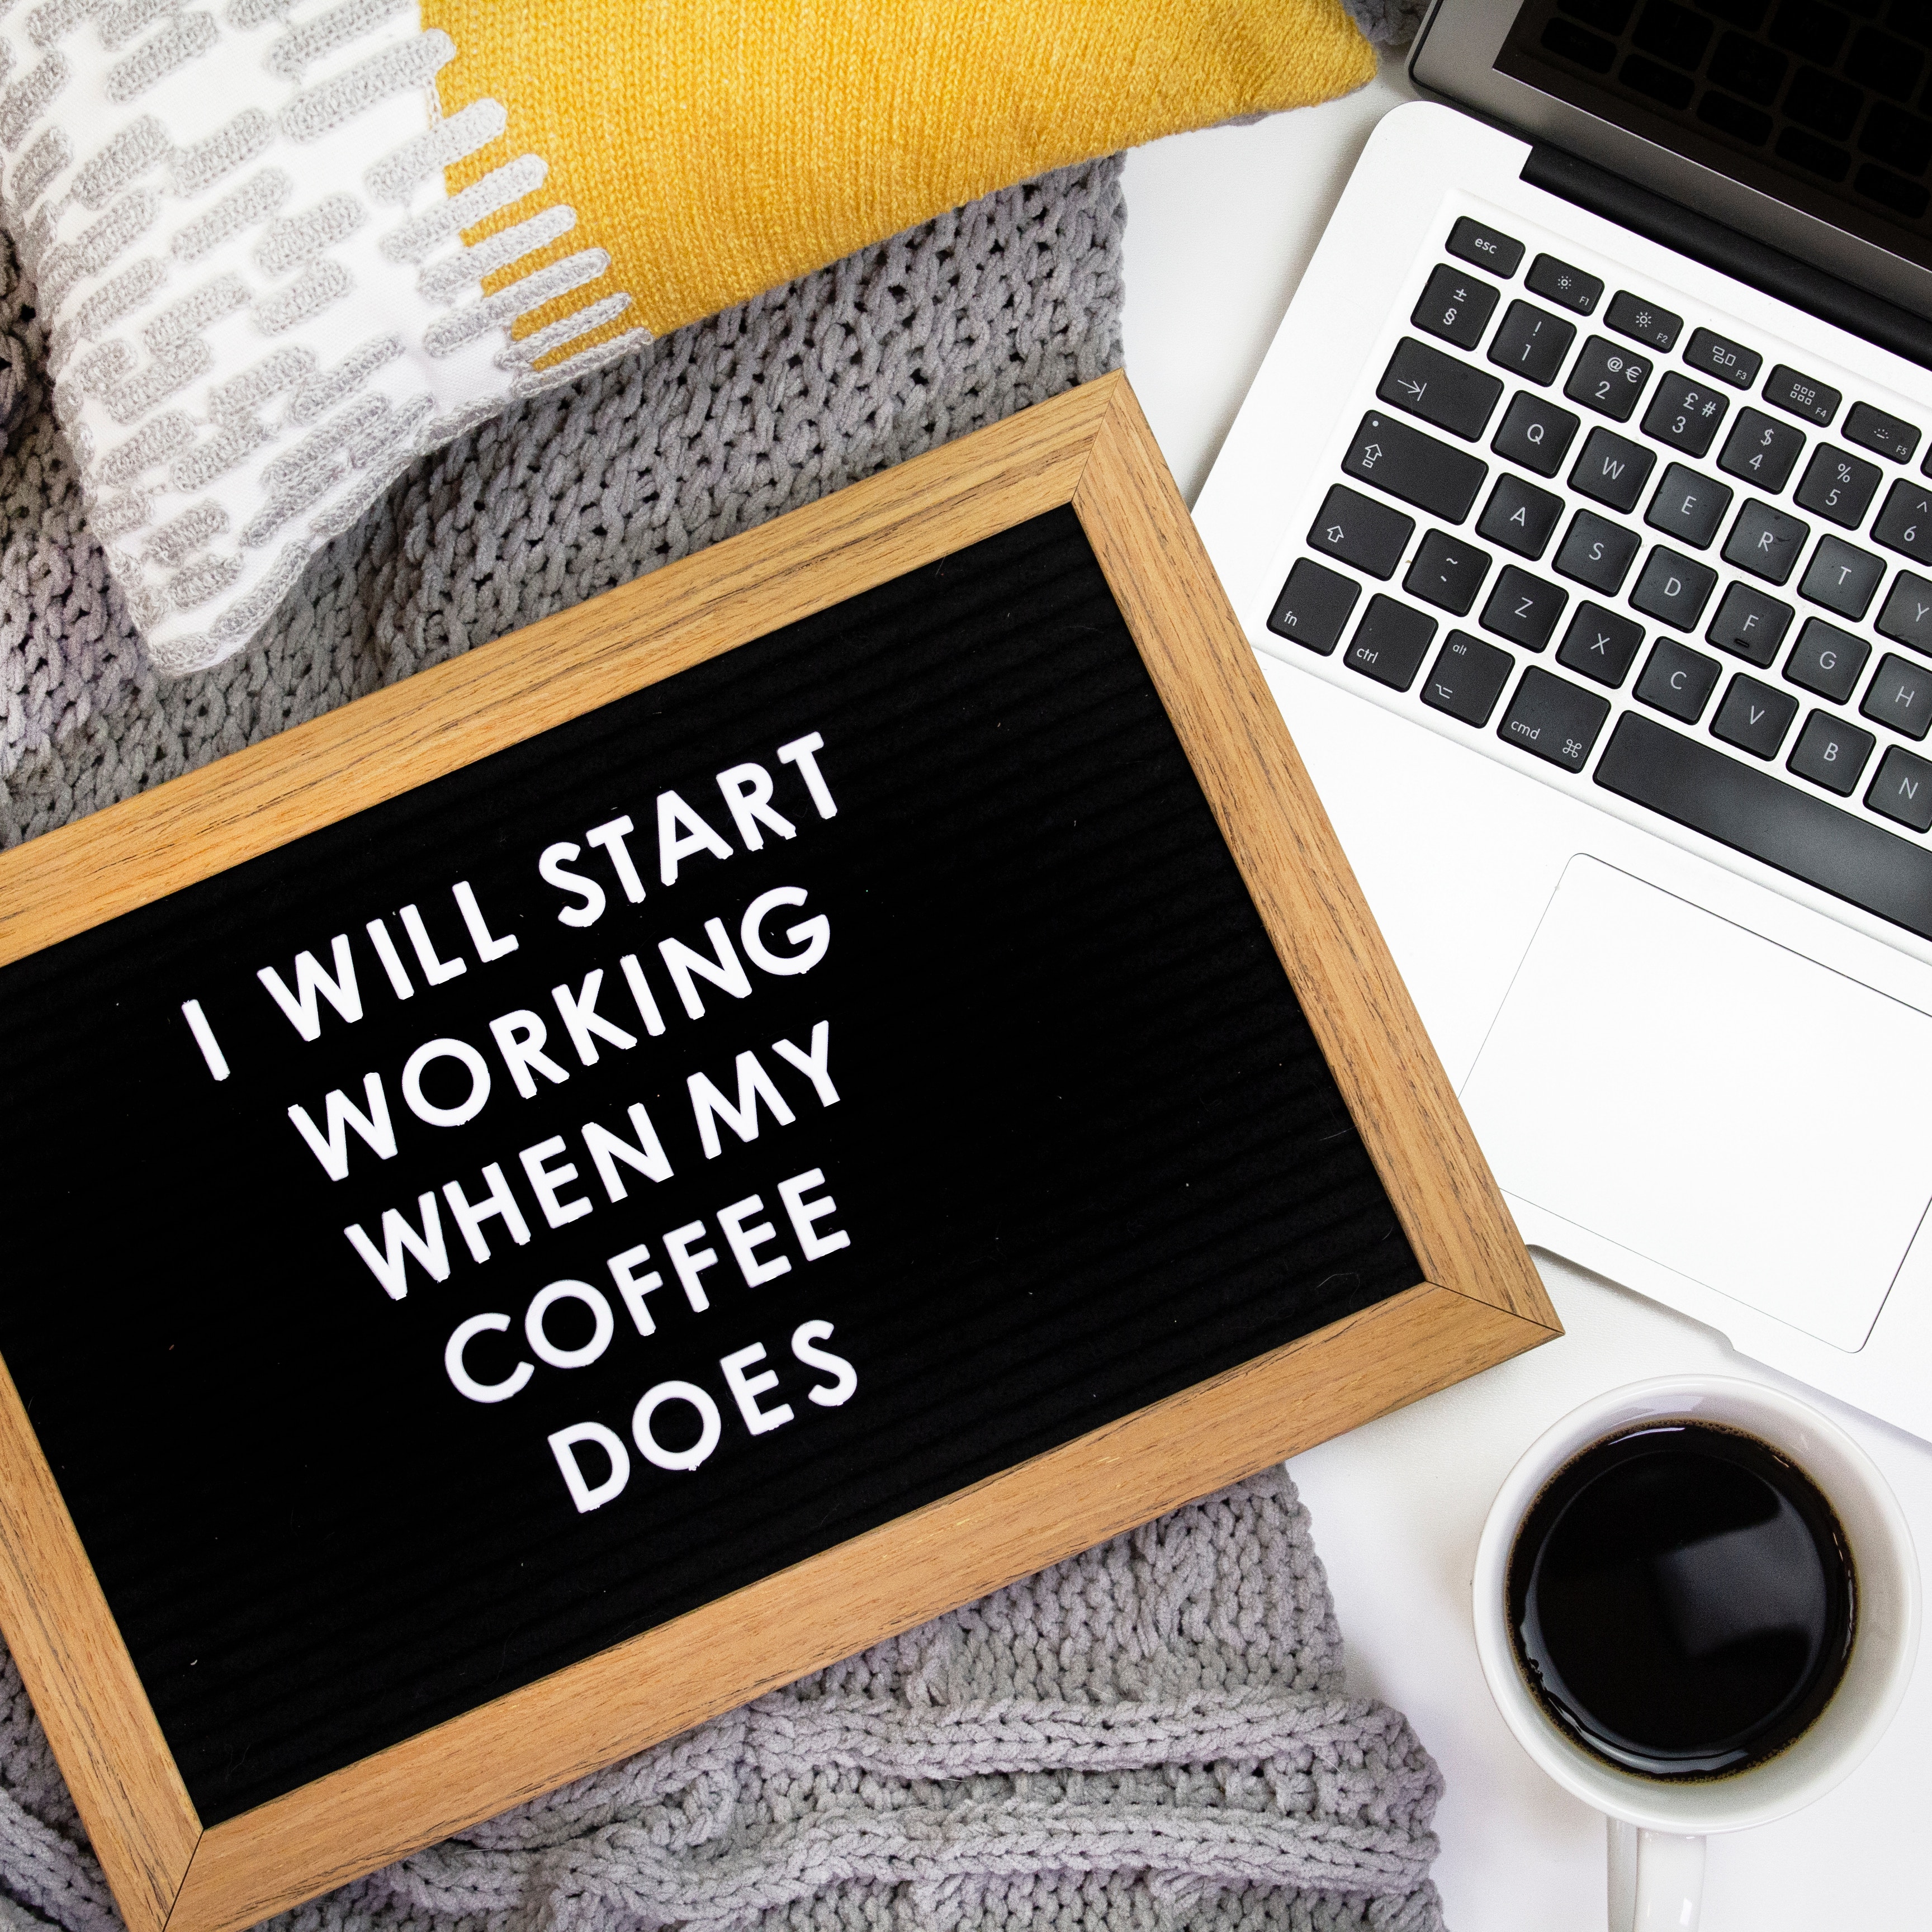 I will start working when my coffee does